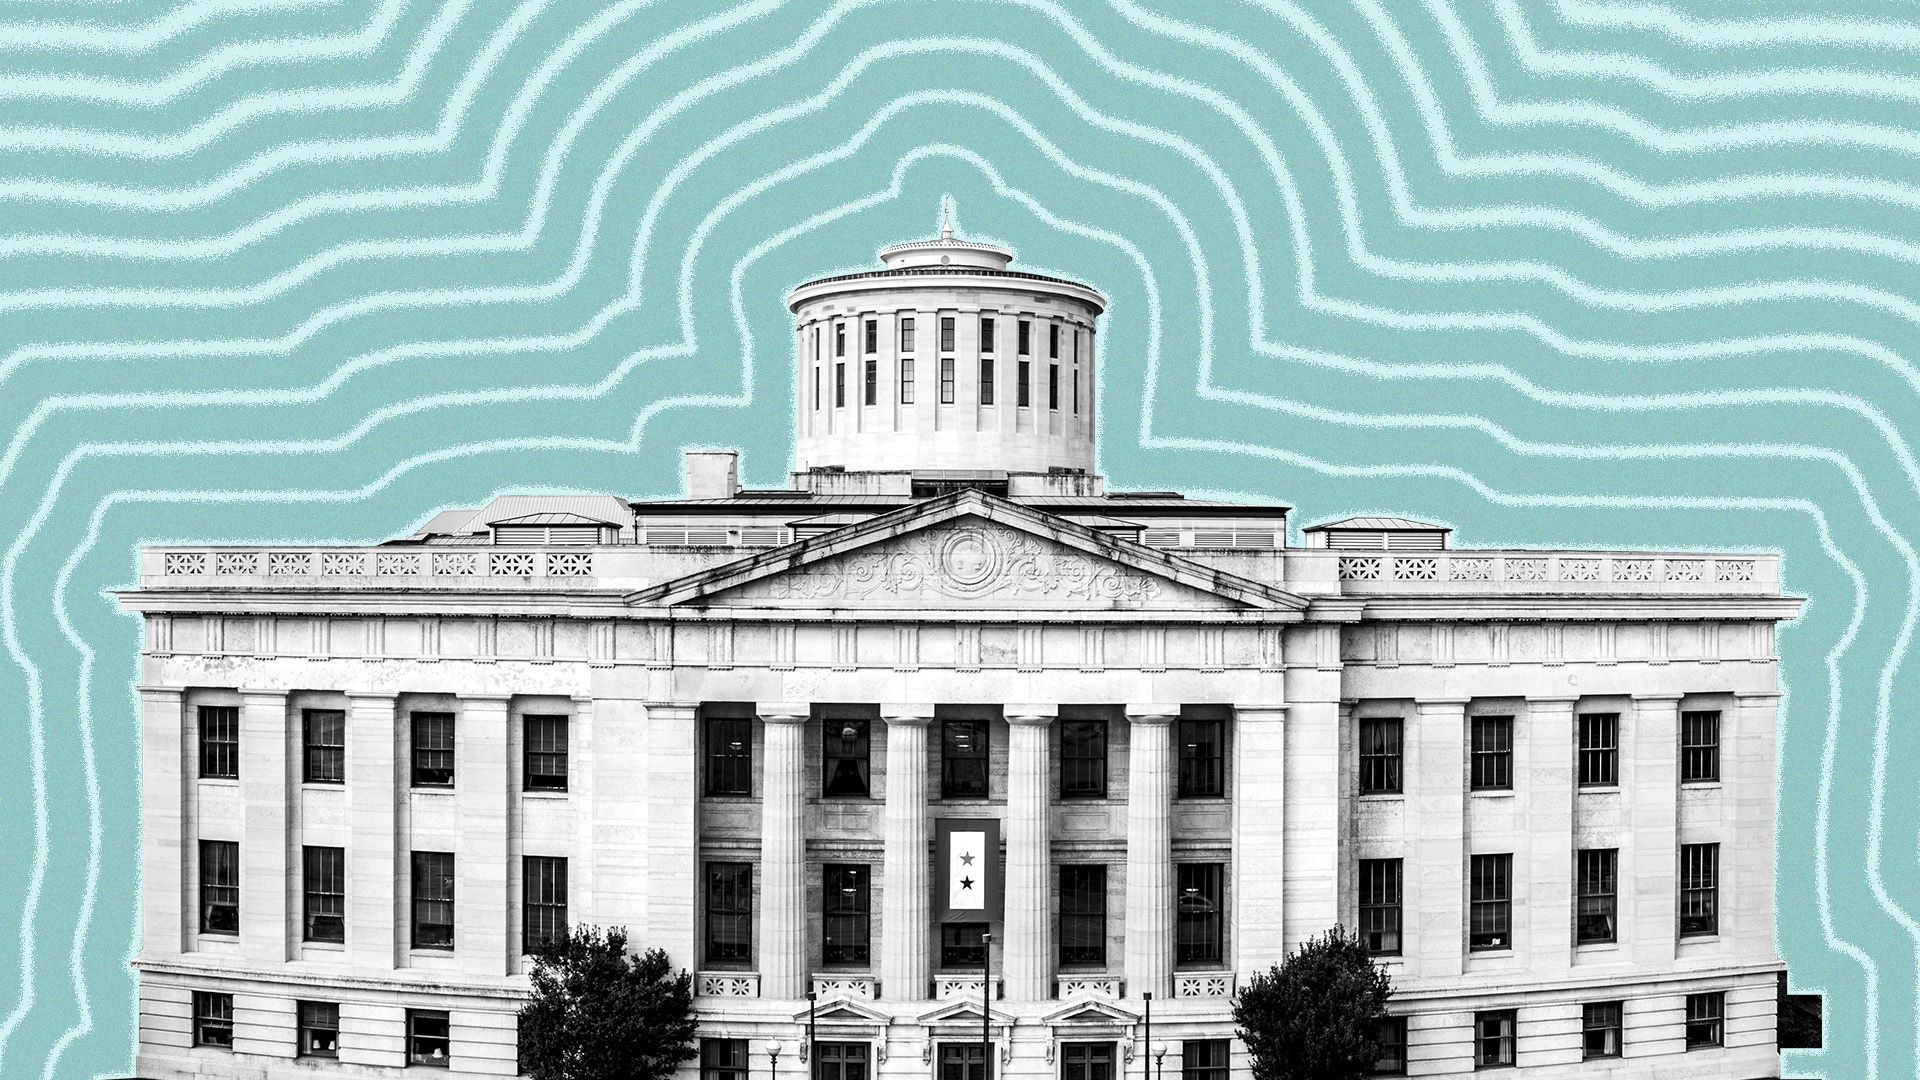 Illustration of the Ohio State Capitol with lines radiating from it.